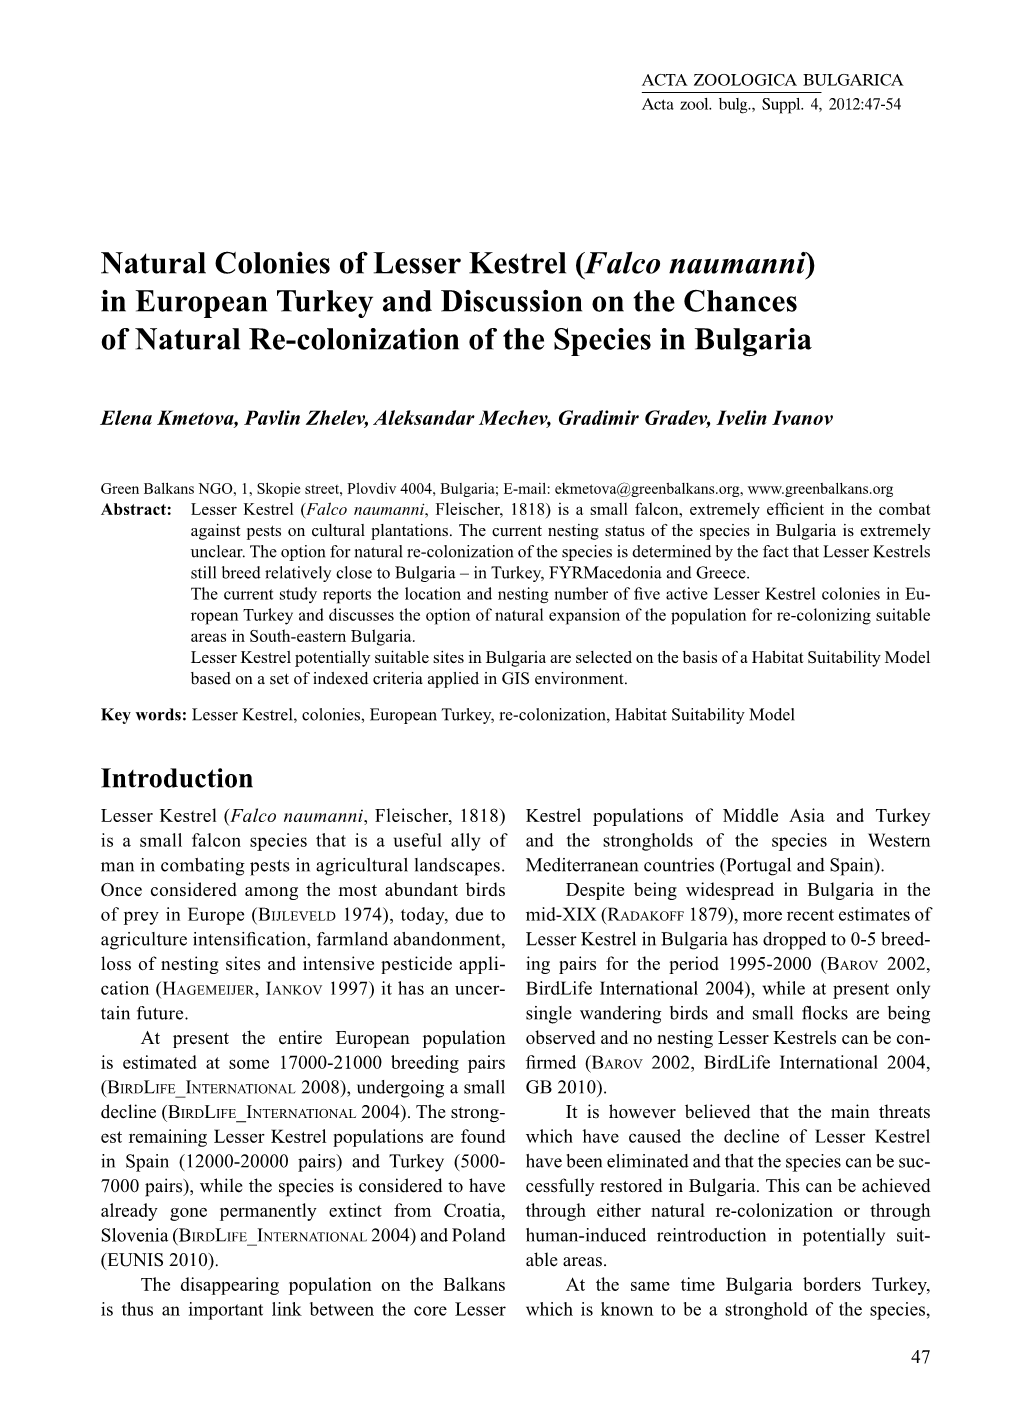 Natural Colonies of Lesser Kestrel (Falco Naumanni) in European Turkey and Discussion on the Chances of Natural Re-Colonization of the Species in Bulgaria